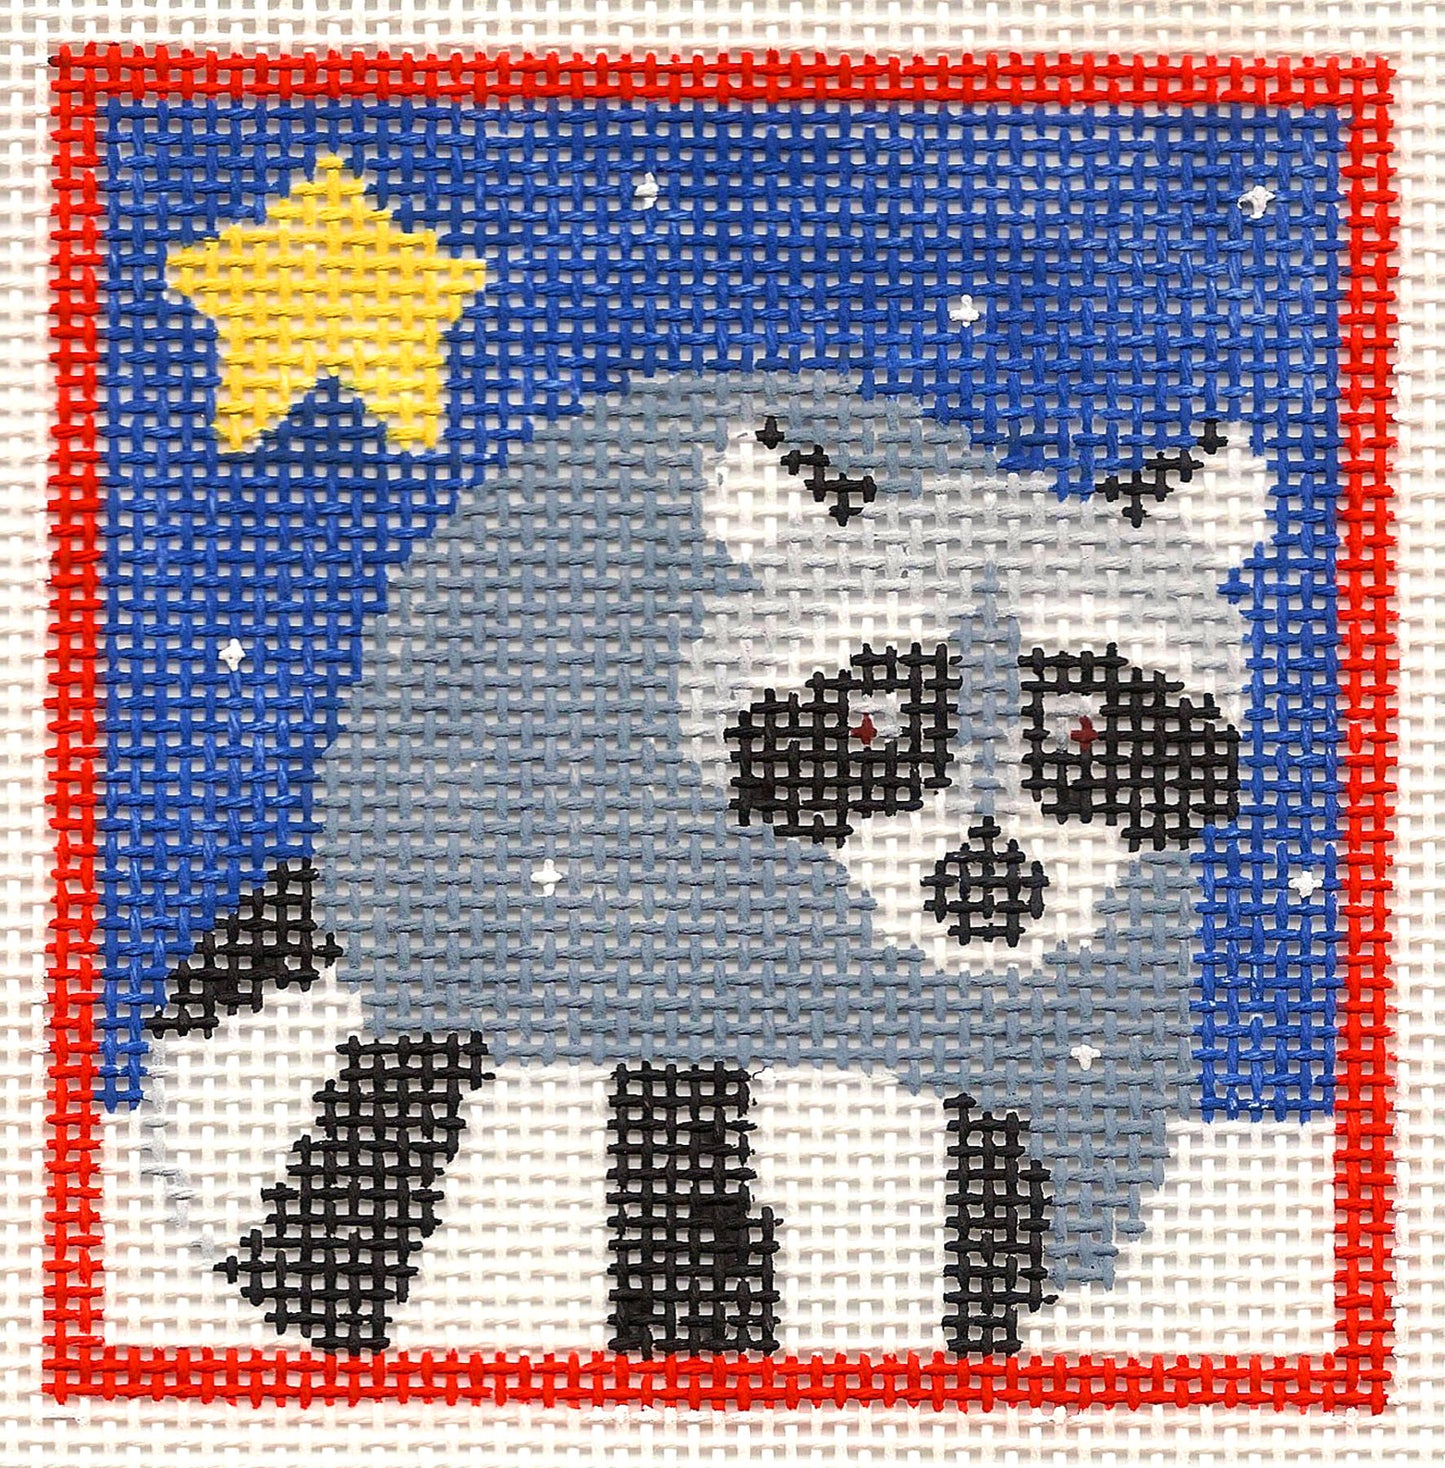 Canvas ~ Raccoon by Starlight handpainted Needlepoint Canvas by Kathy Schenkel